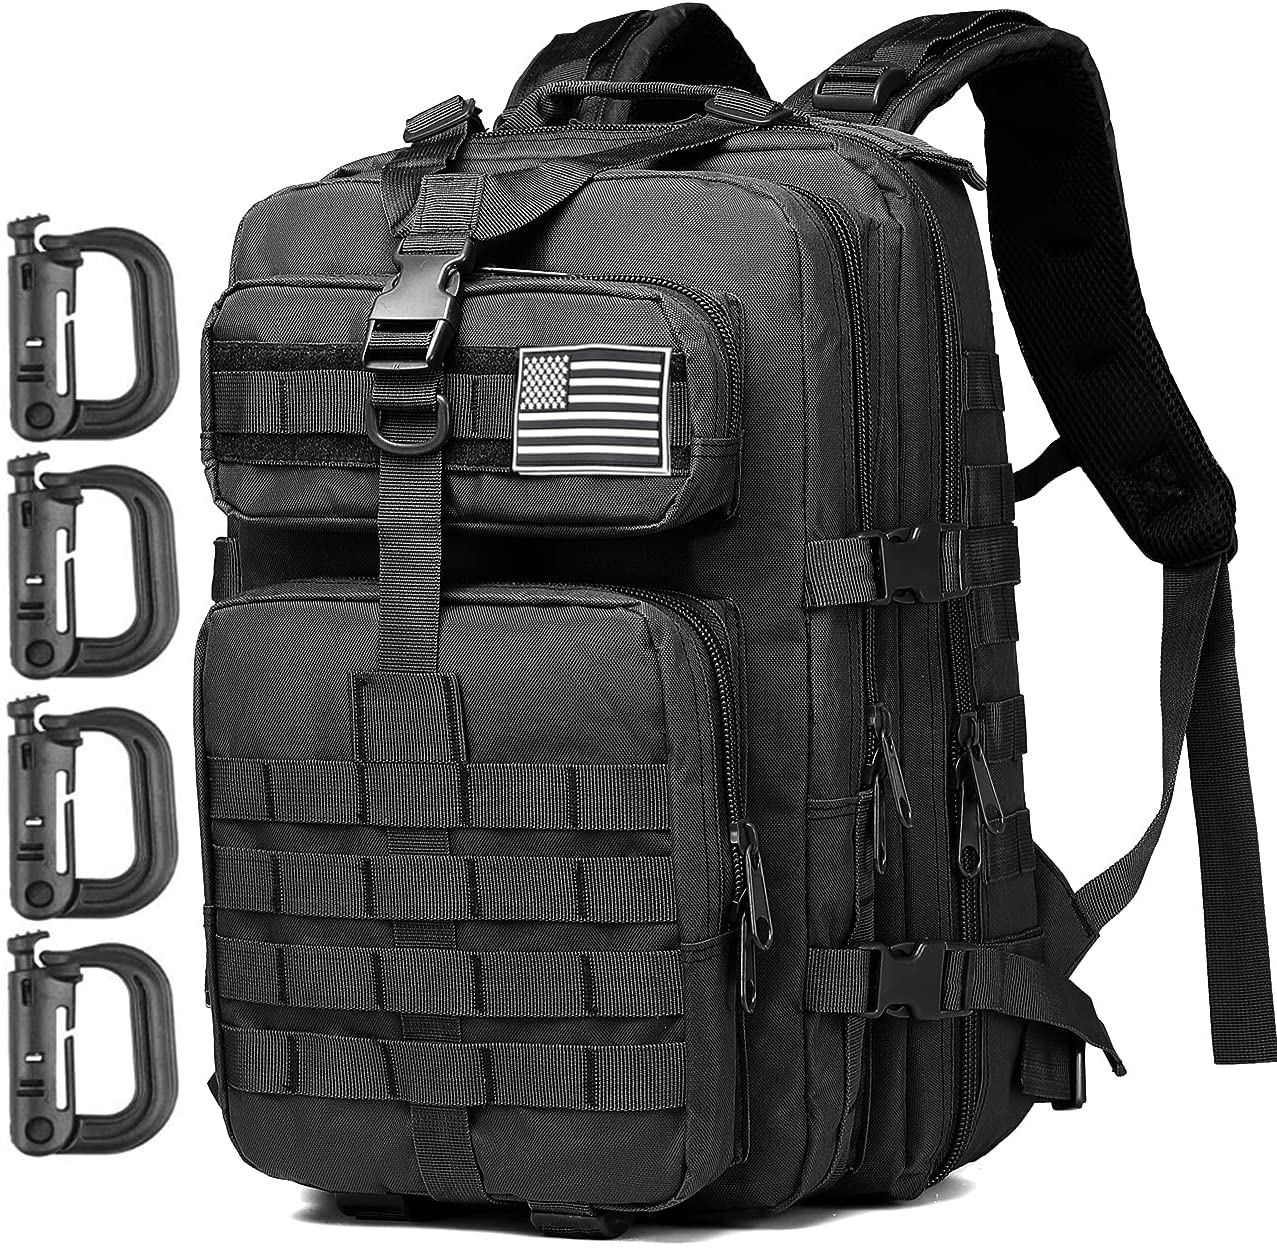 Tactical Rucksack Backpack Military Hunting Hiking Daypack Large Army Molle Backpack